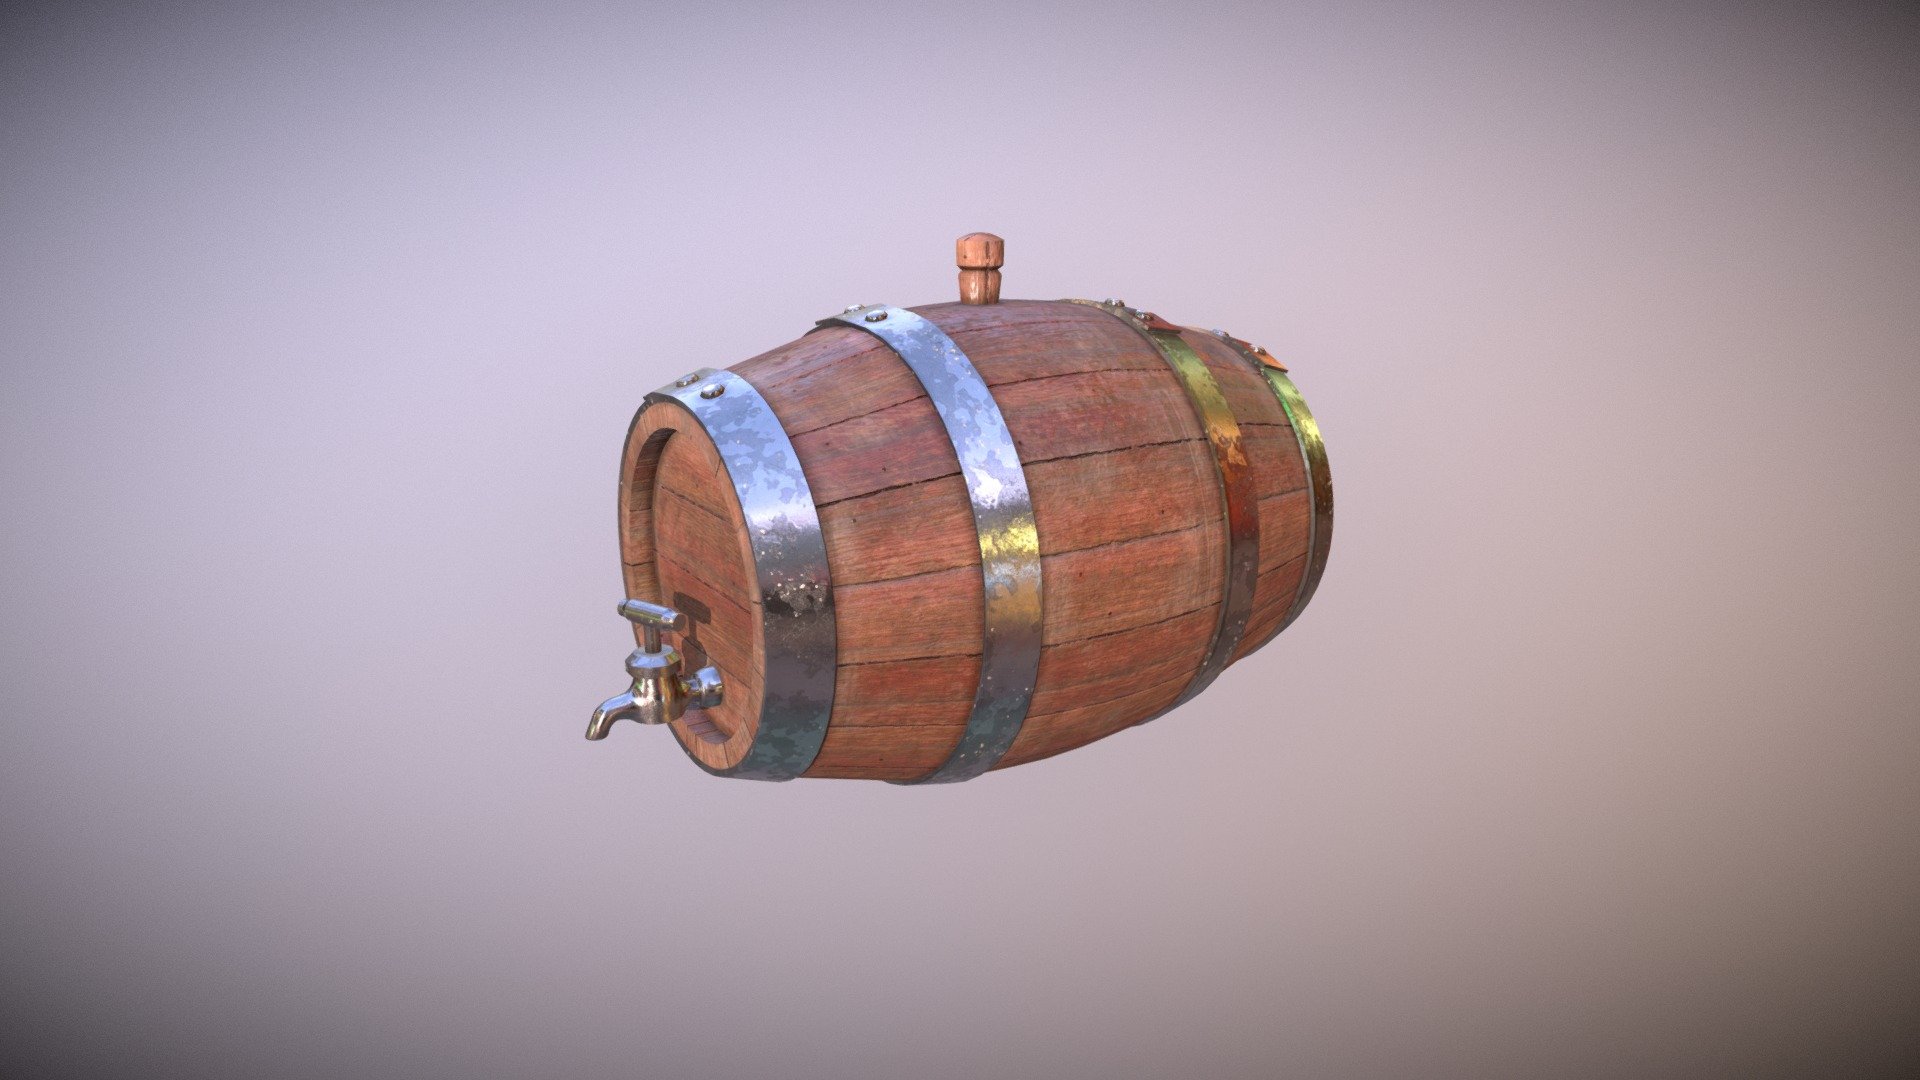 low poly beer barrel modelled in 3ds max and textured with substance. unwrapped with two materials
can be used as a game prop, VR AR project - beer barrel - Buy Royalty Free 3D model by melvinx 3d model